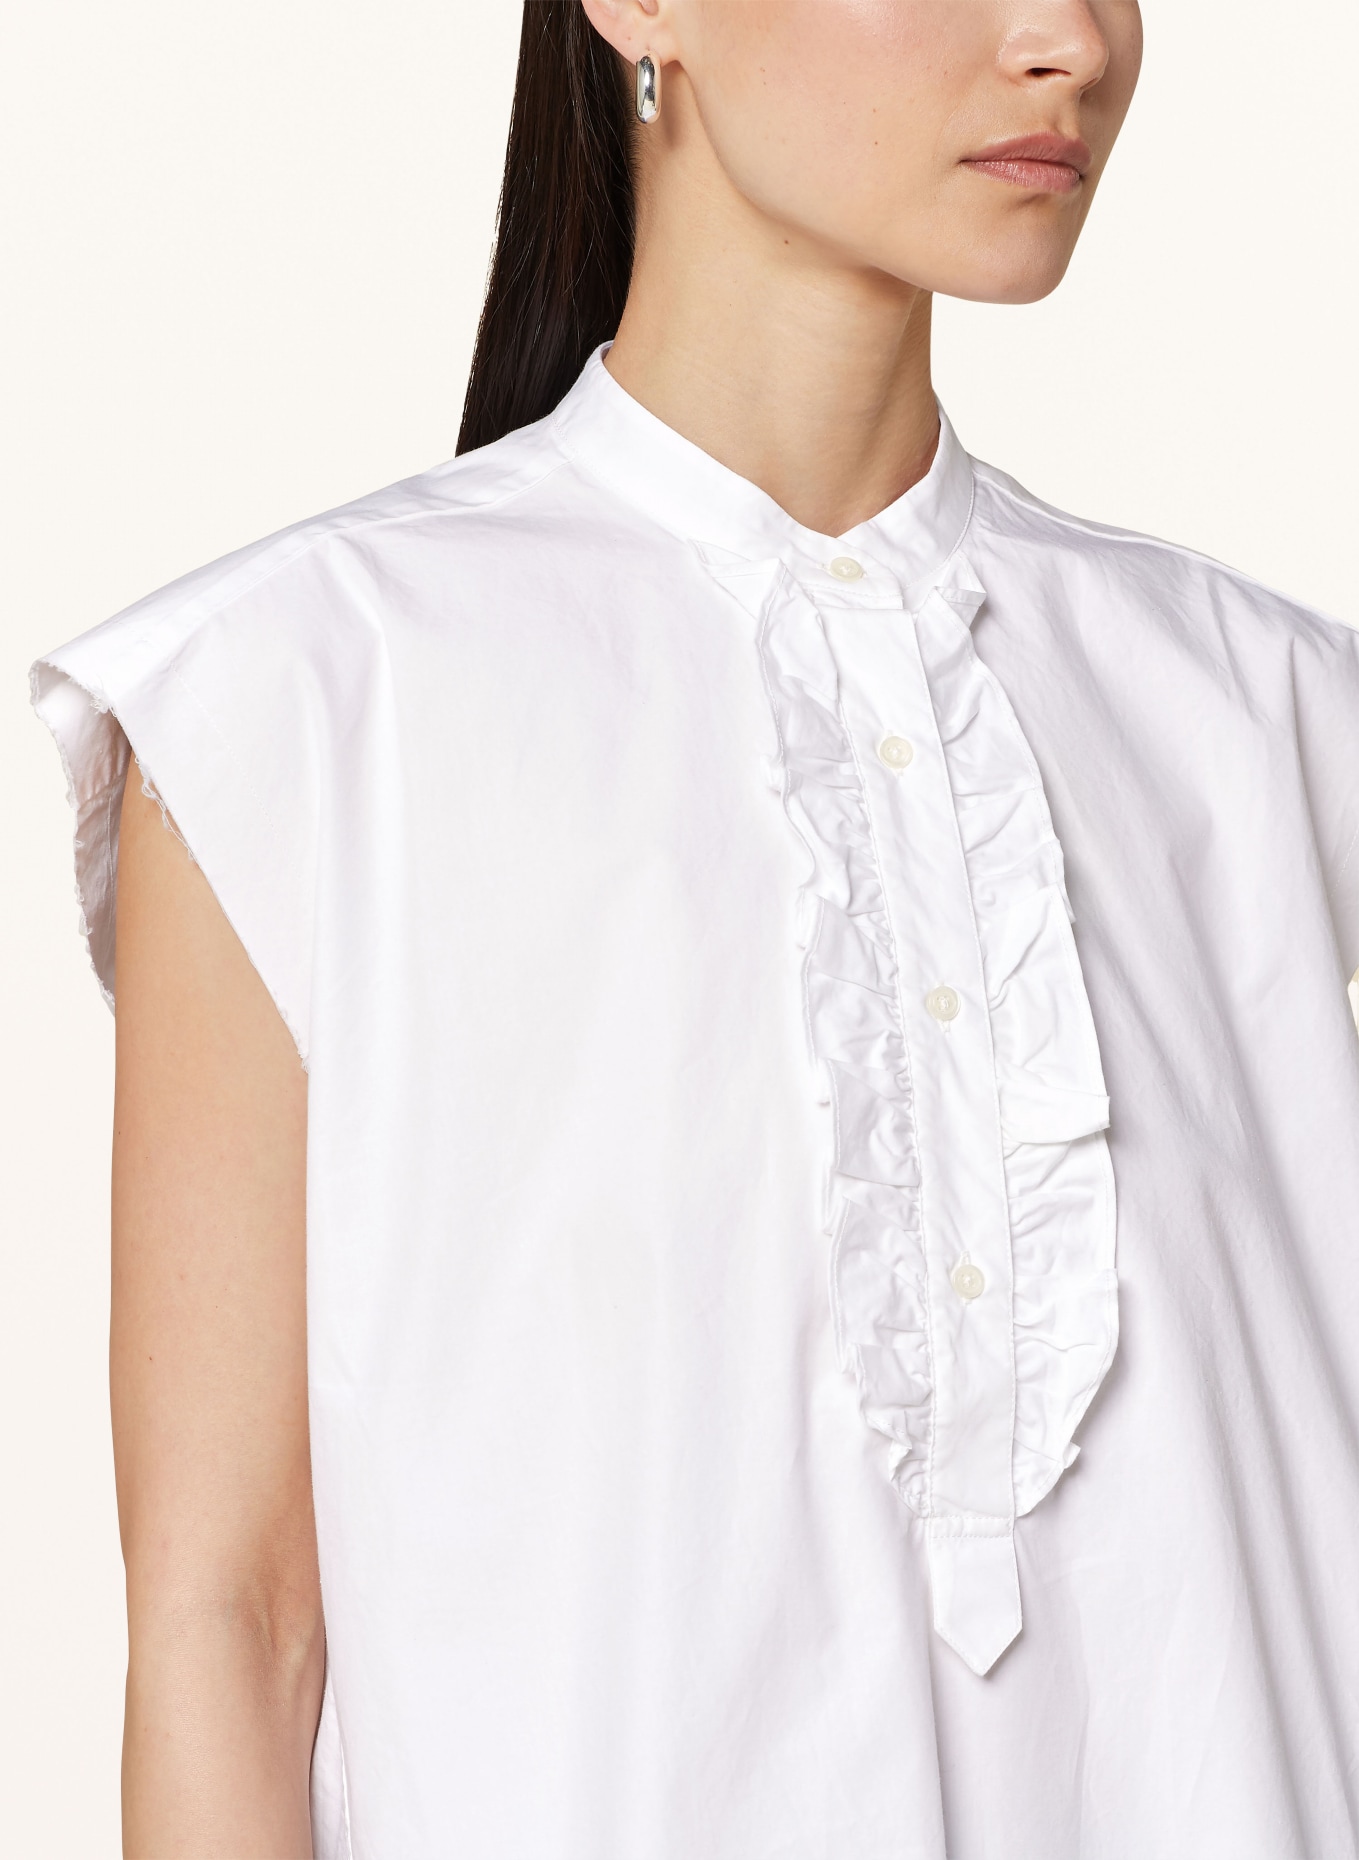 SoSUE Blouse top BARCELONA with ruffles, Color: WHITE (Image 4)